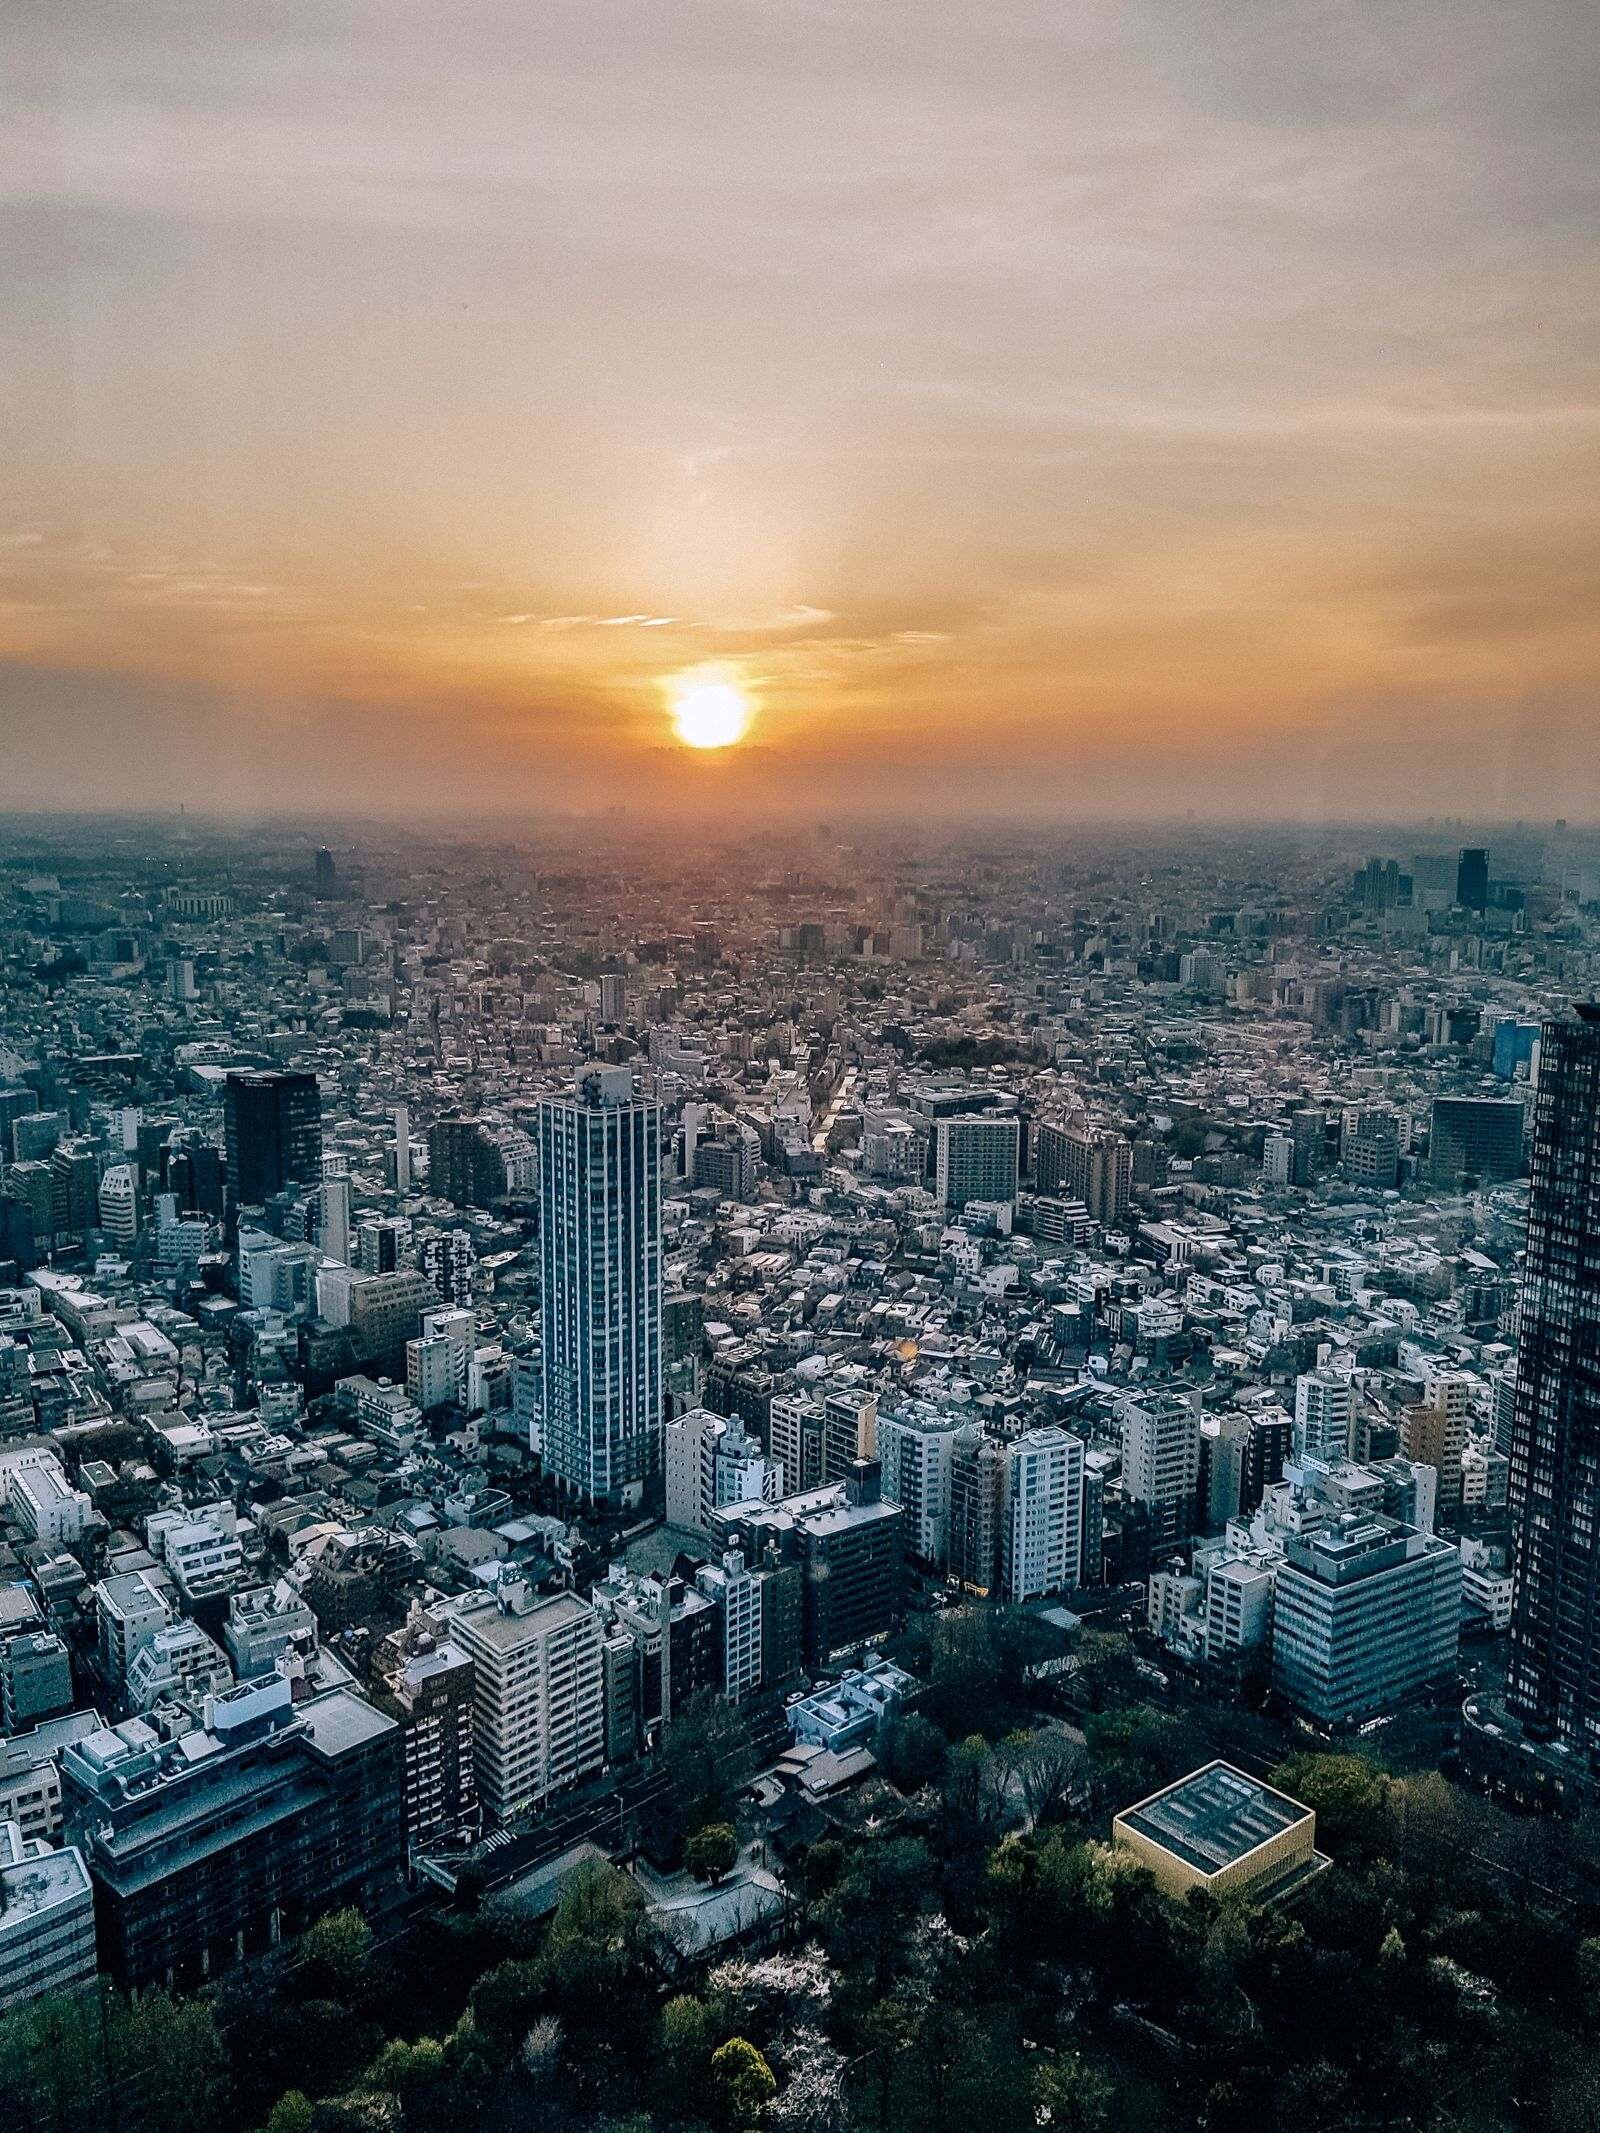 The sunset over Tokyo from Metropolitan Government Building Observation Deck